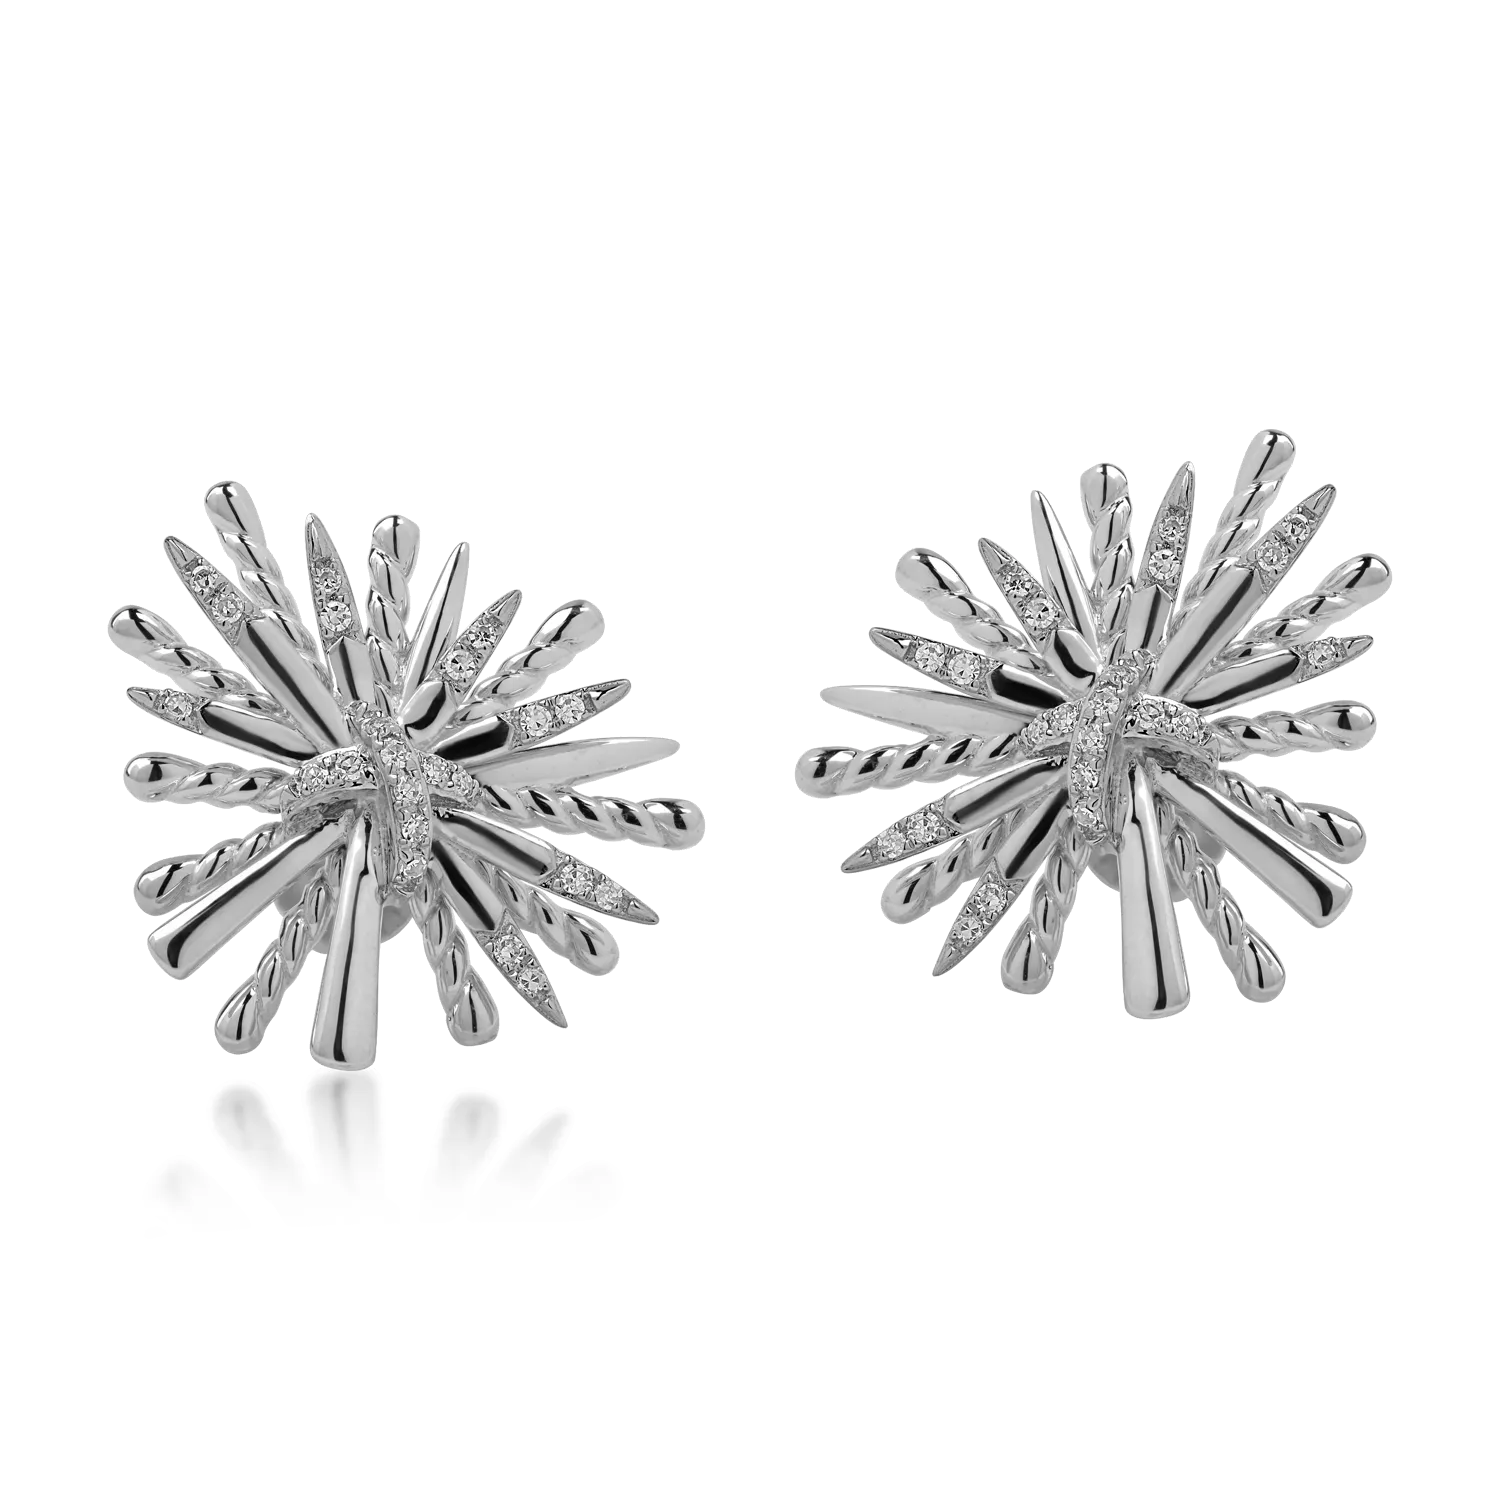 White gold flower earrings with 0.109ct diamonds